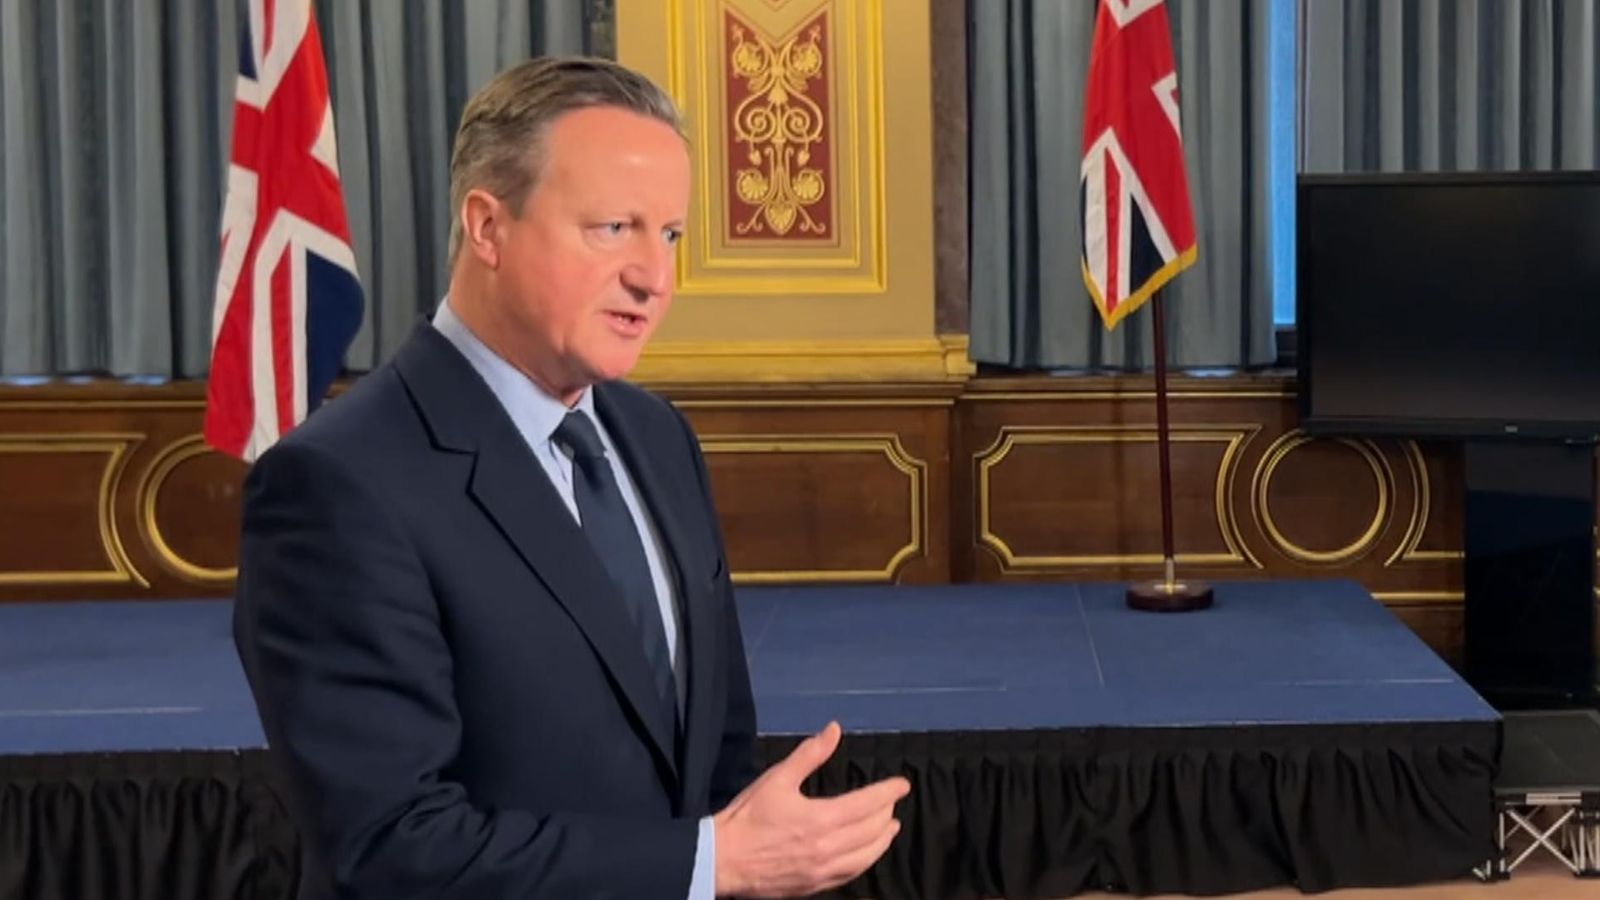 'More attacks' in Red Sea if UK didn't act, says David Cameron as he defends military action